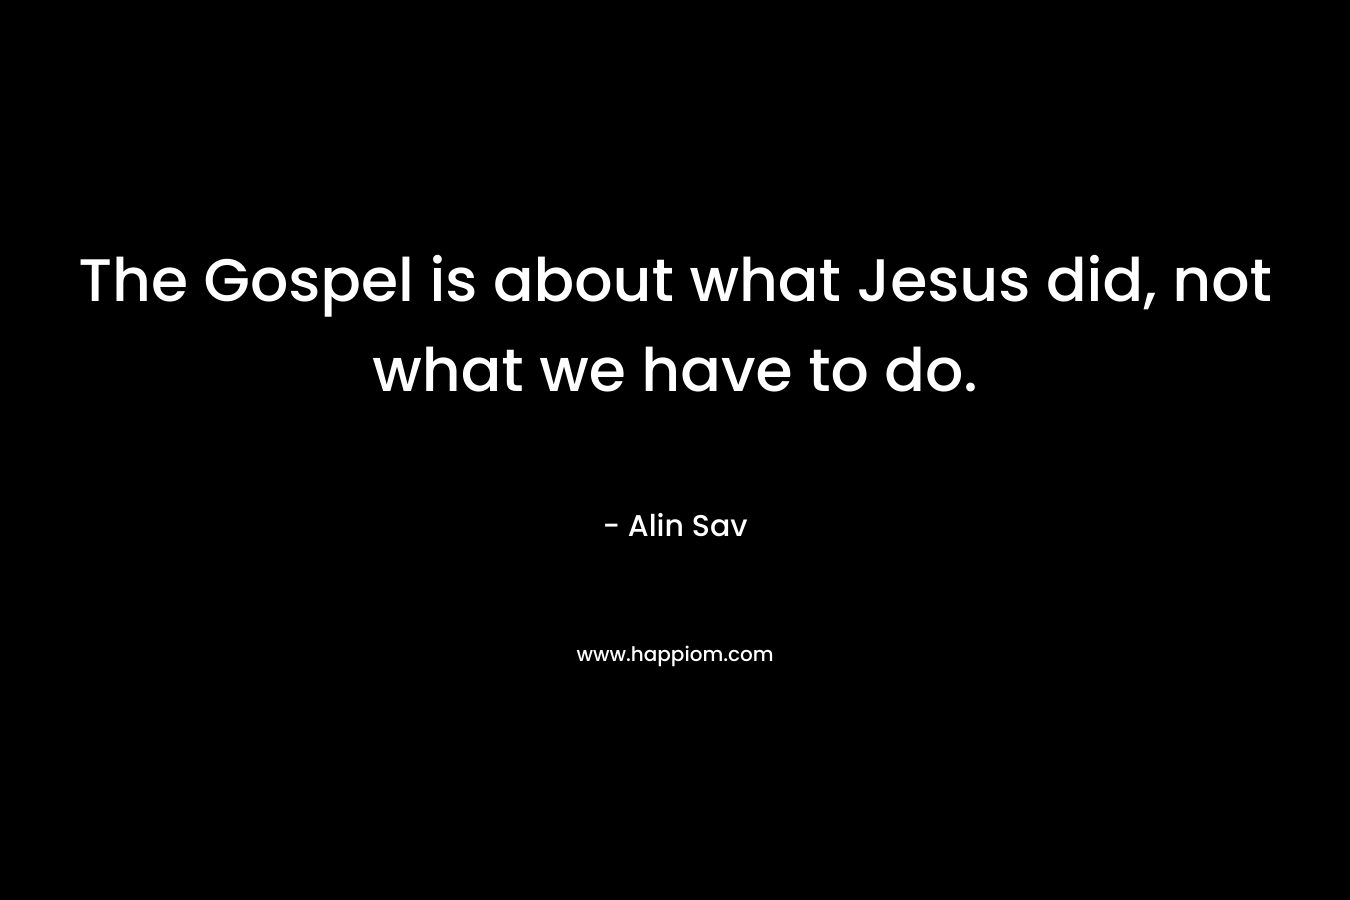 The Gospel is about what Jesus did, not what we have to do.